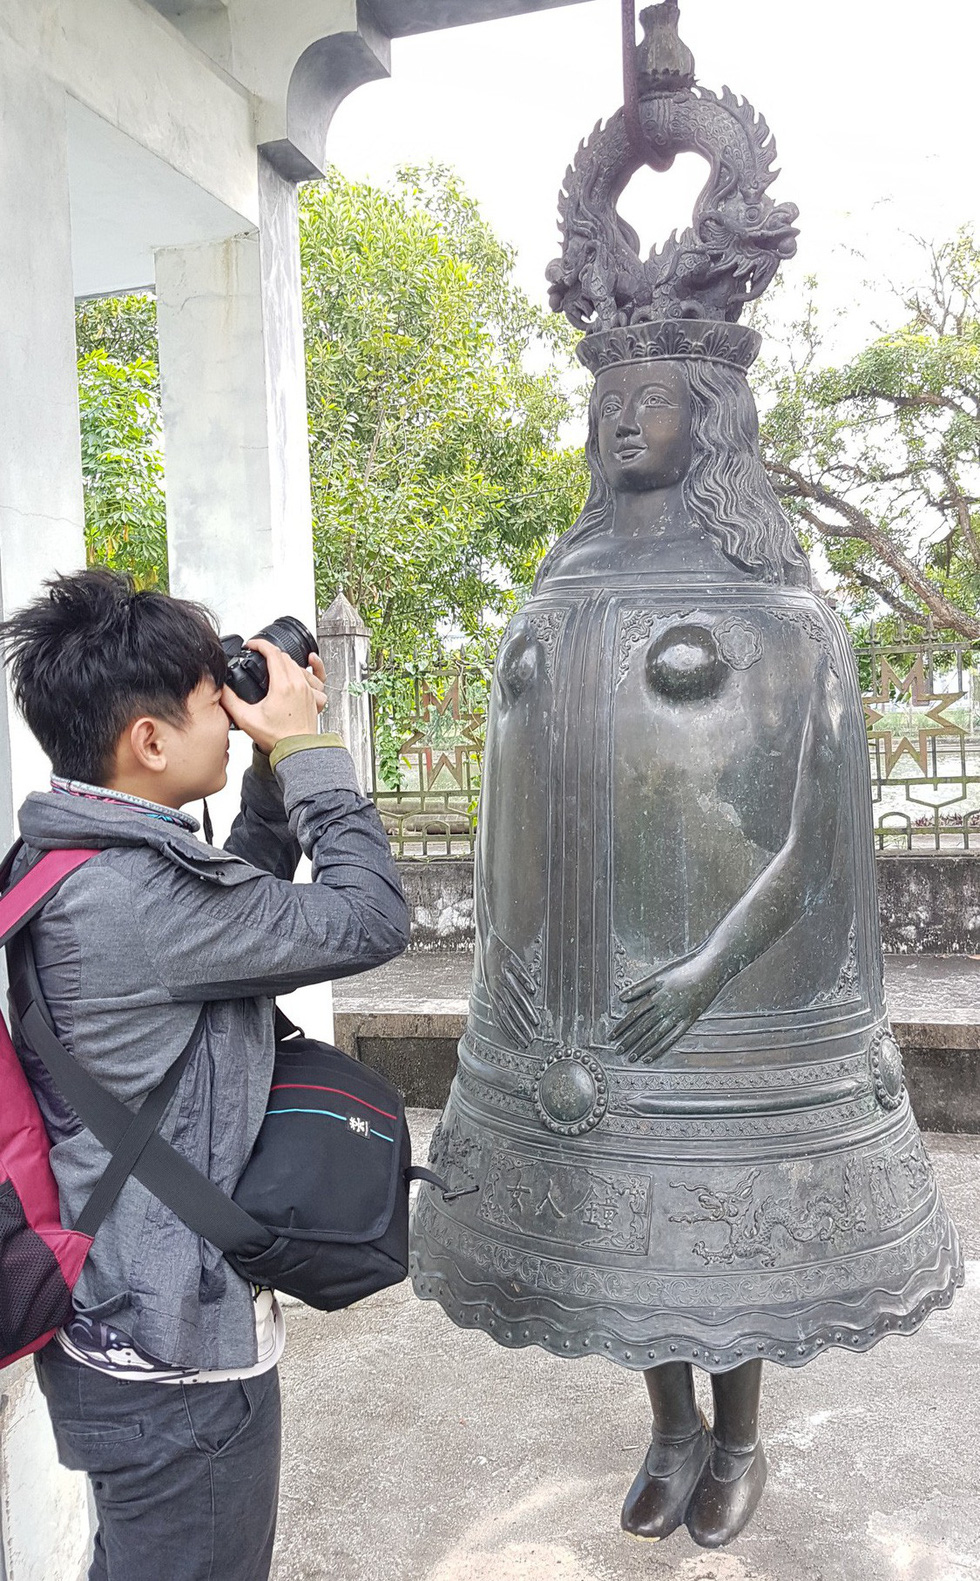 A man takes pictures of the ‘female bell’ at the Bui Chu Diocese in Nam Dinh Province, northern Vietnam. Photo: Thai Loc / Tuoi Tre